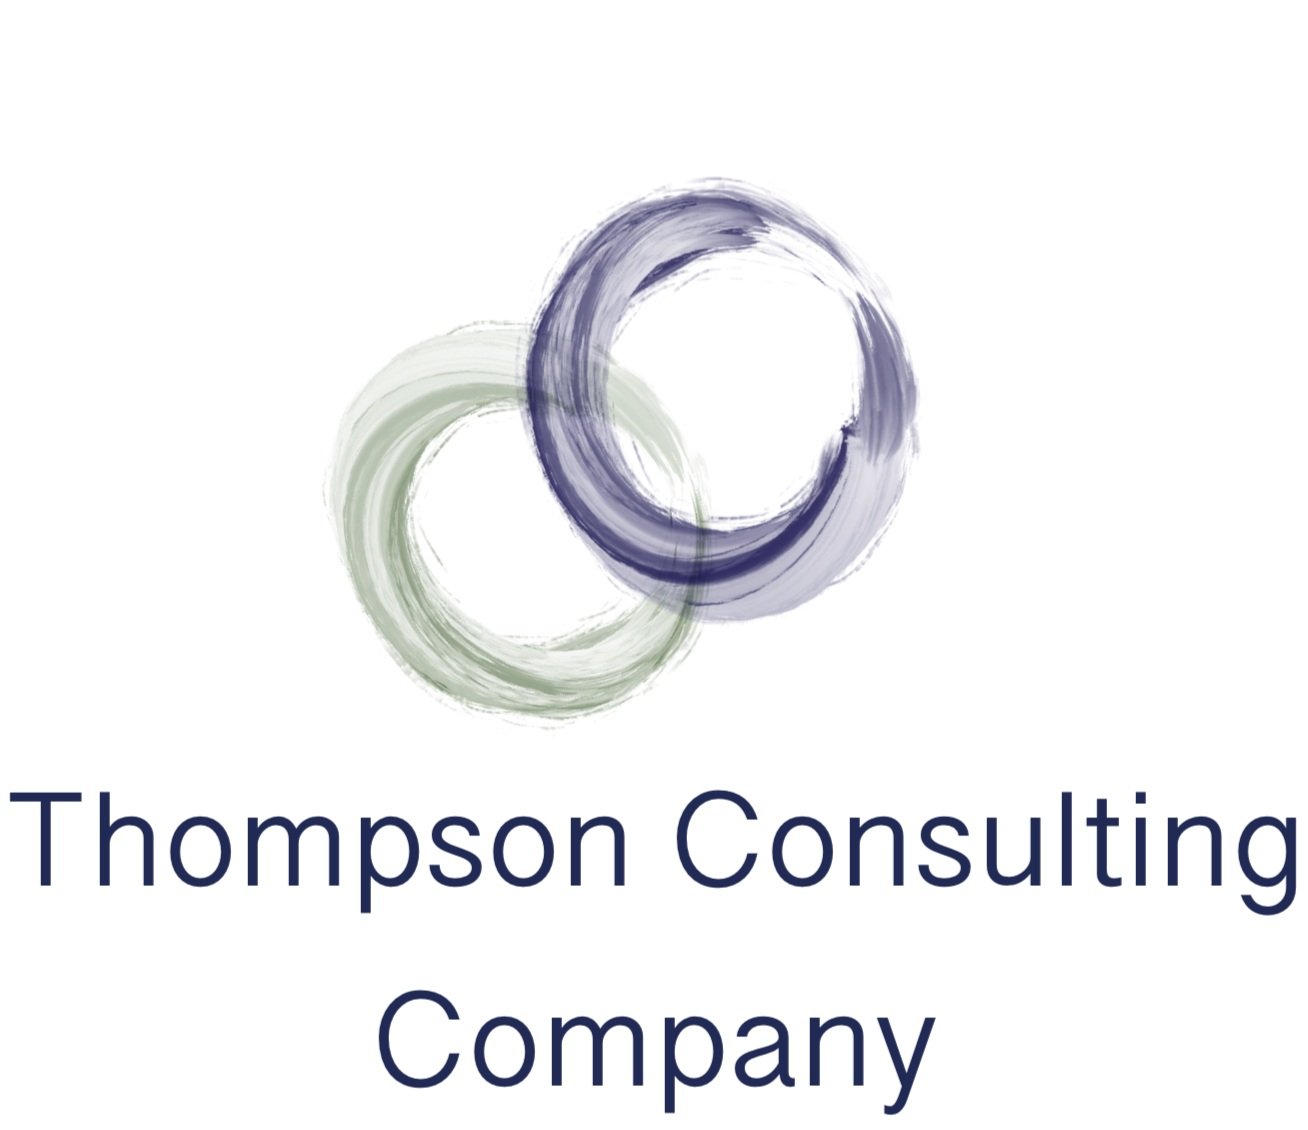 Thompson Consulting Company